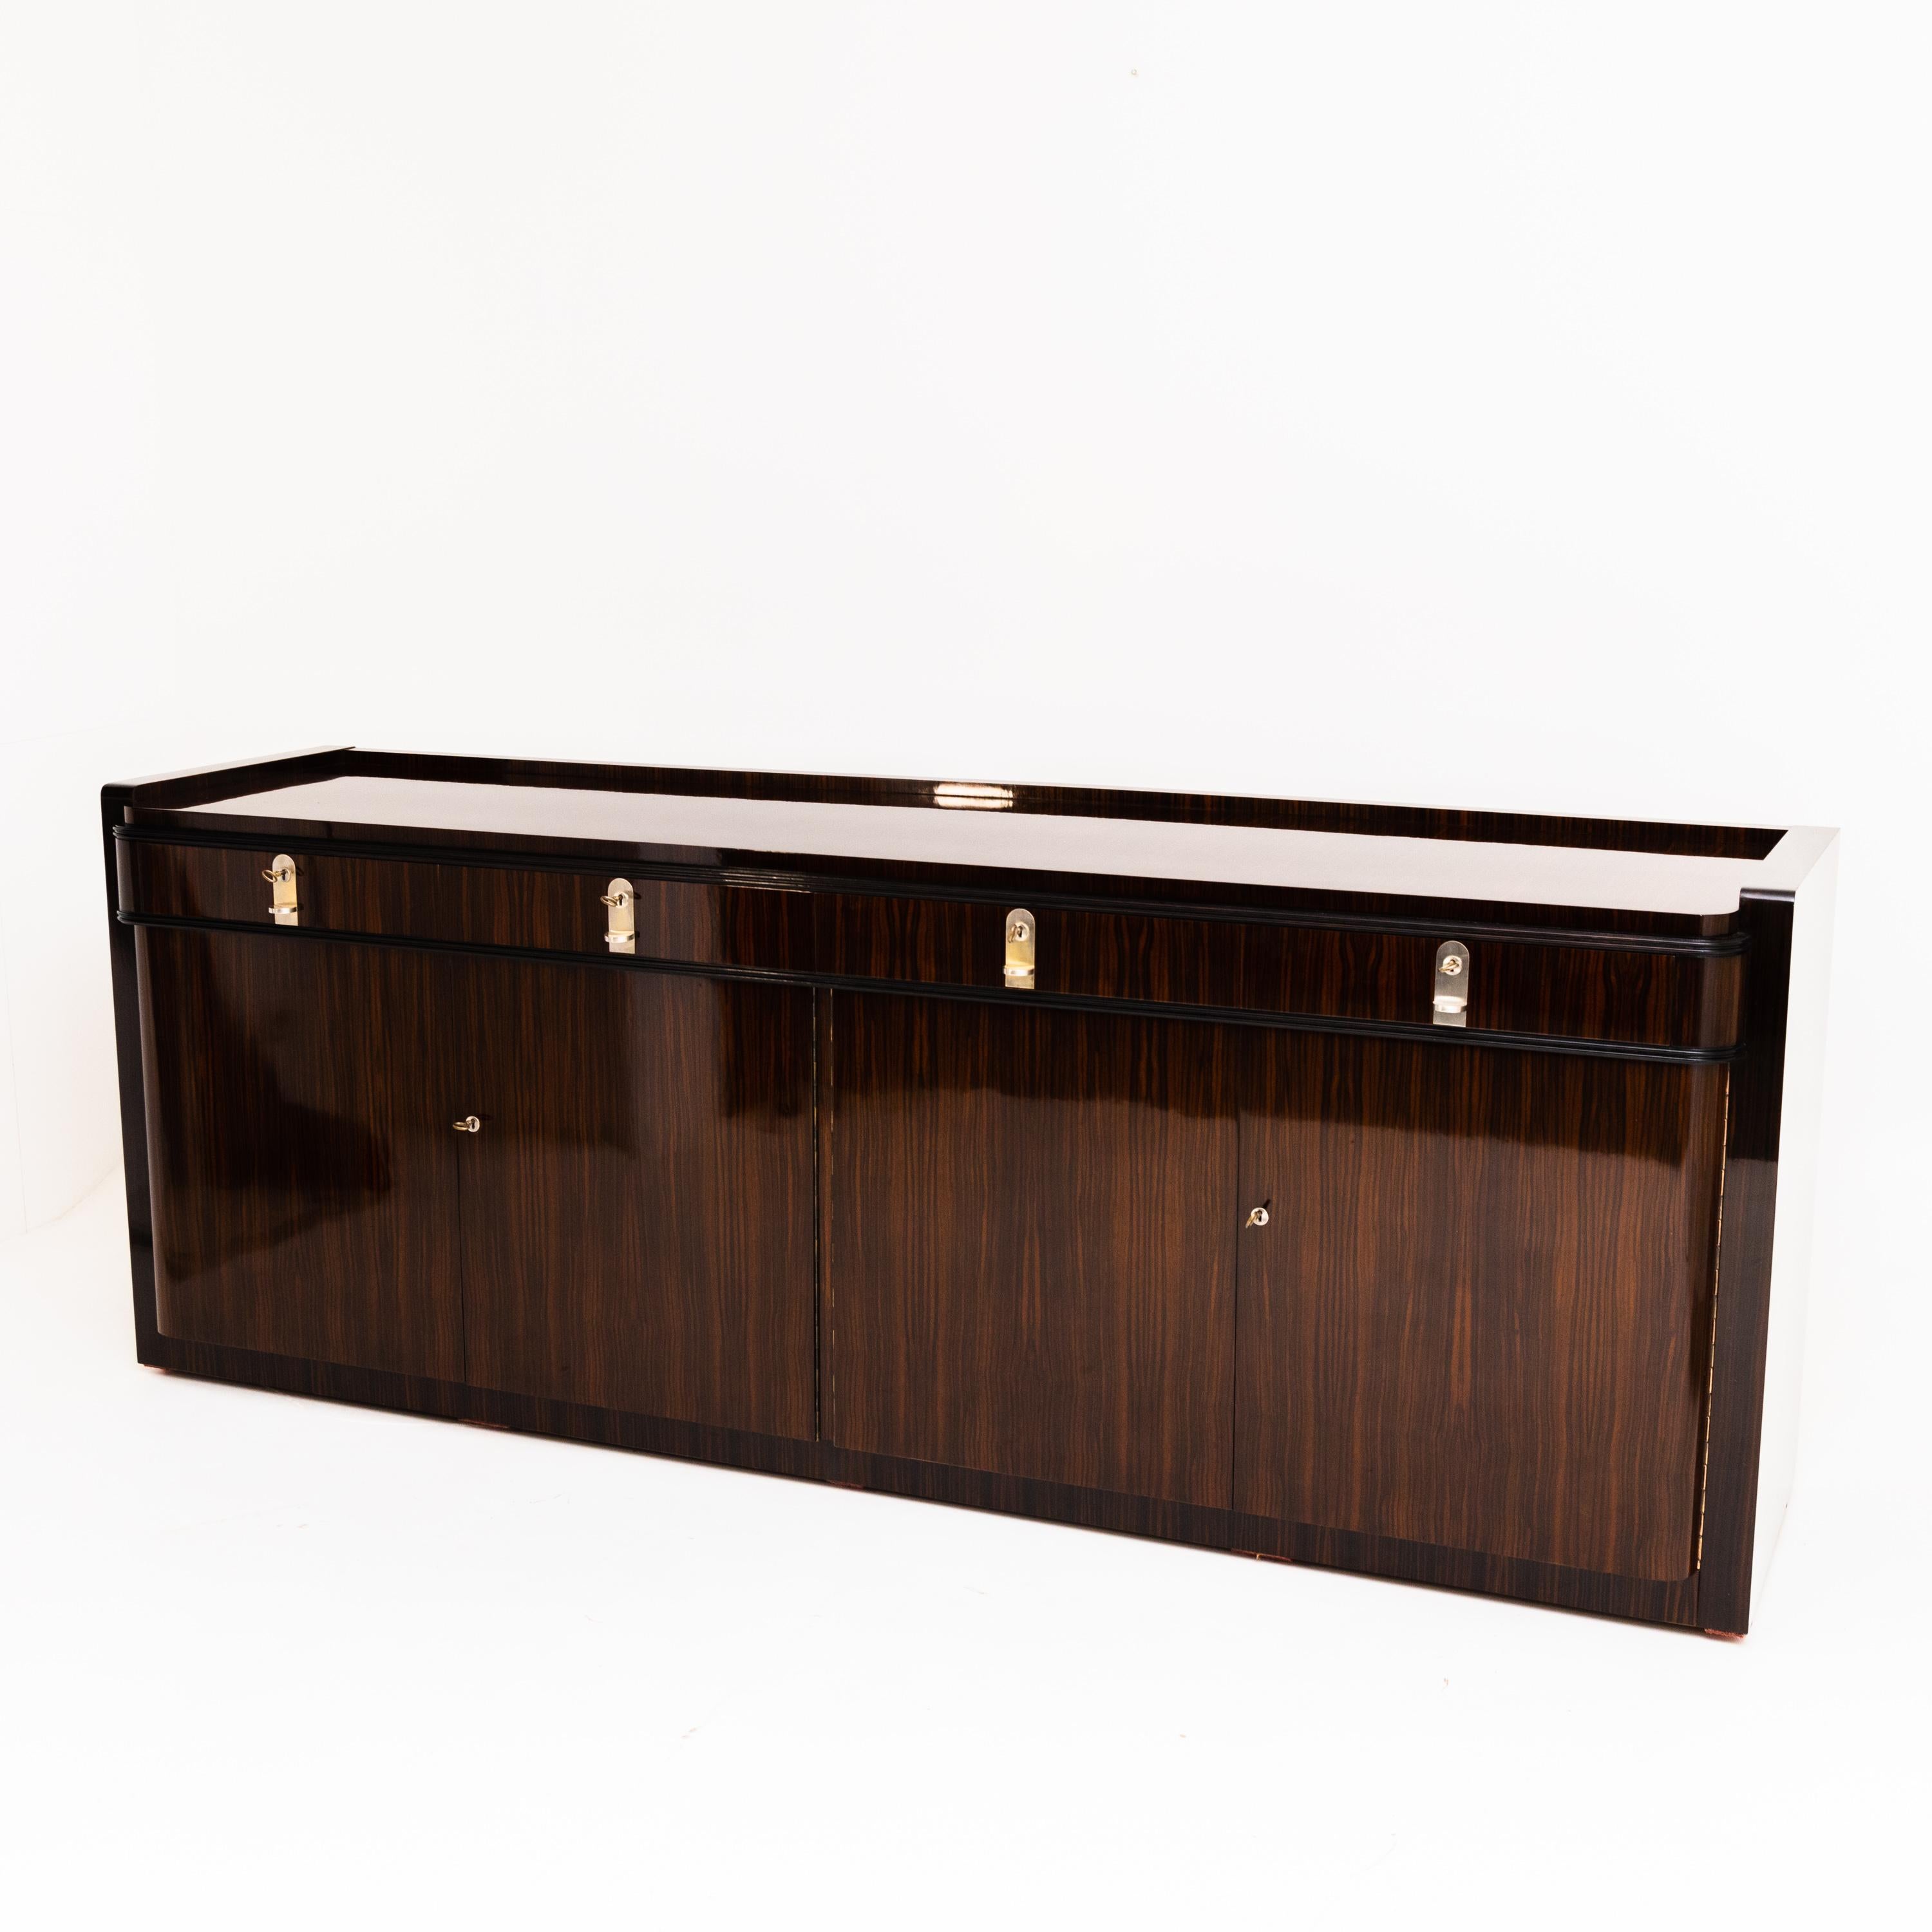 Early 20th Century Art Deco Sideboard in the Style of Bruno Paul, Germany, 1920s